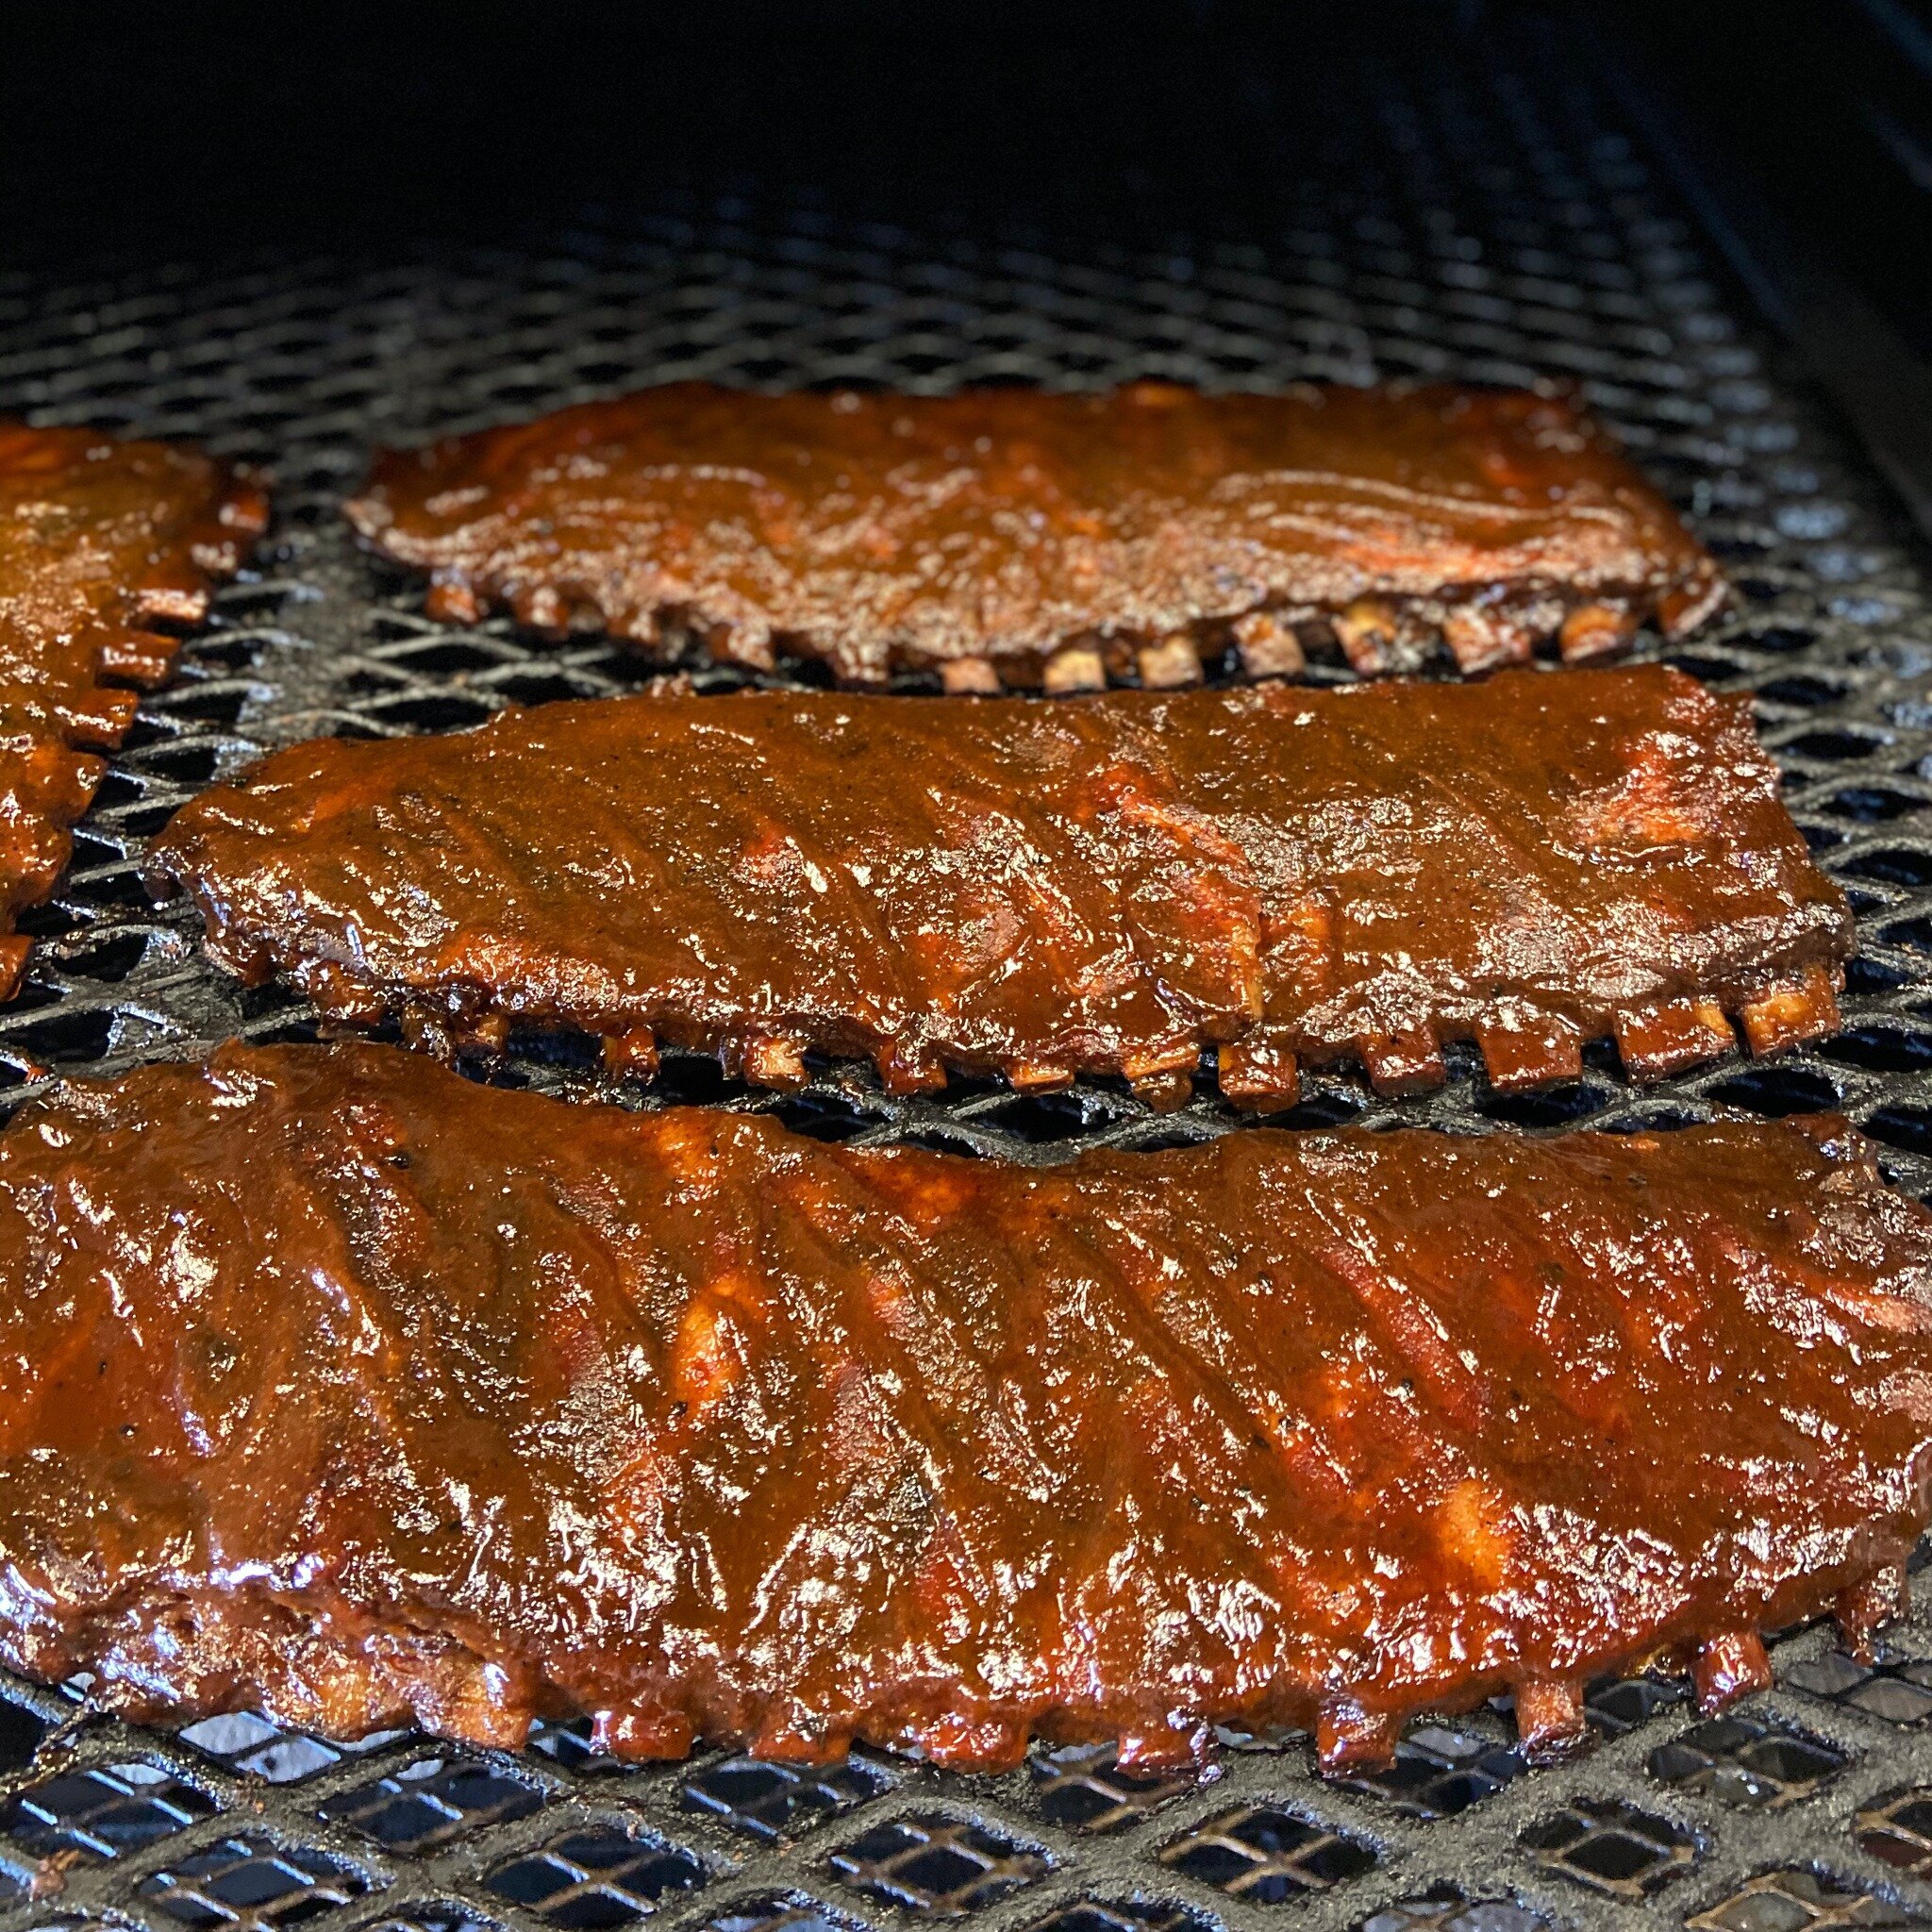 Serving St. Louis Ribs by the 1/2 rack, dripping in Dr. Pepper sauce, every Friday and Saturday! Eat up meat freaks!!!